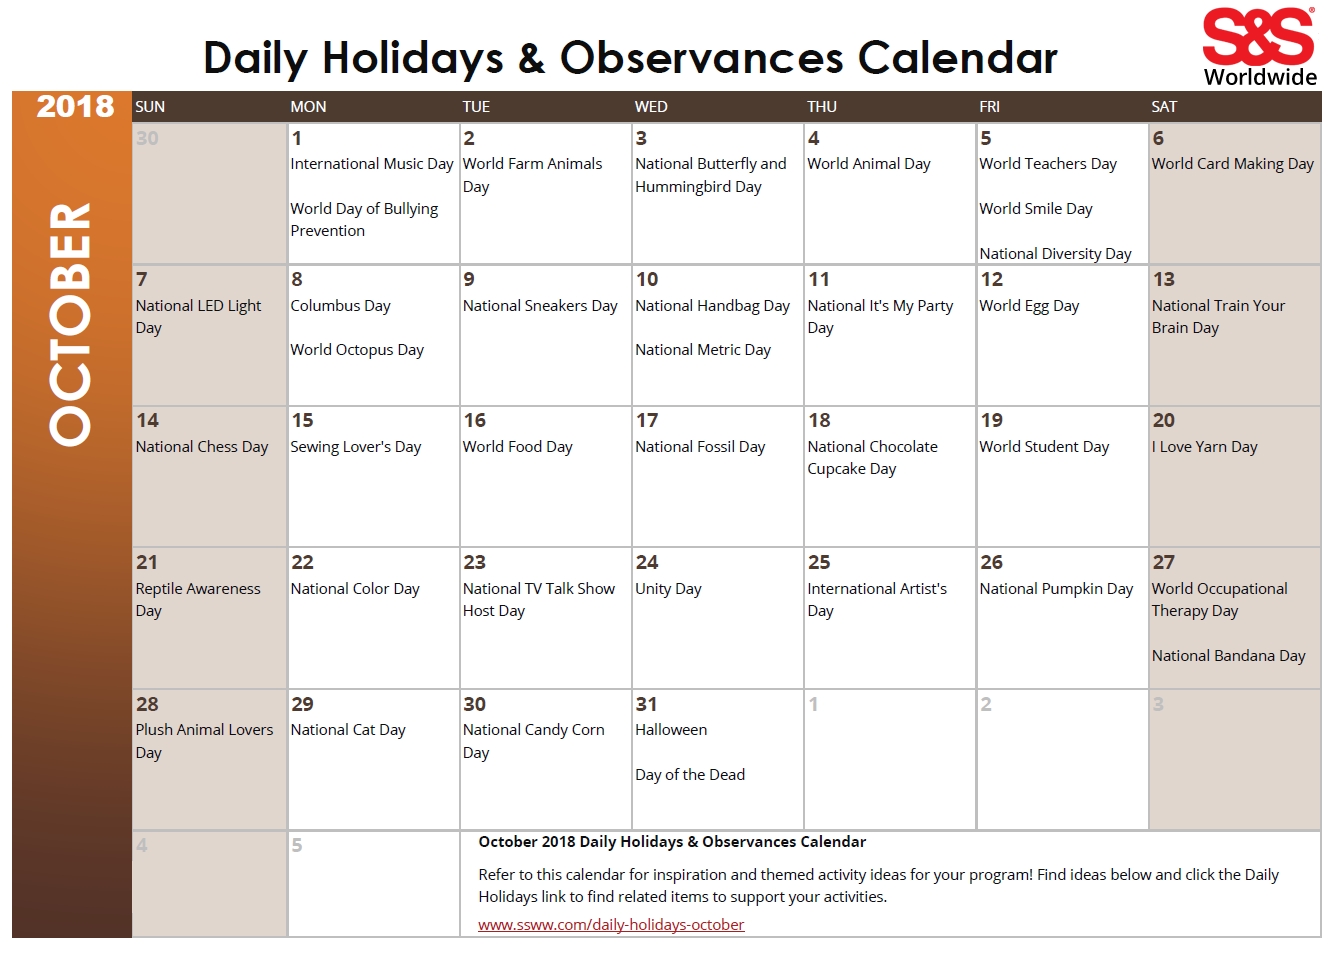 October Daily Holidays &amp; Observances Printable Calendar - S&amp;s Blog intended for Holiday Themed Cupcake Templates For Calendar